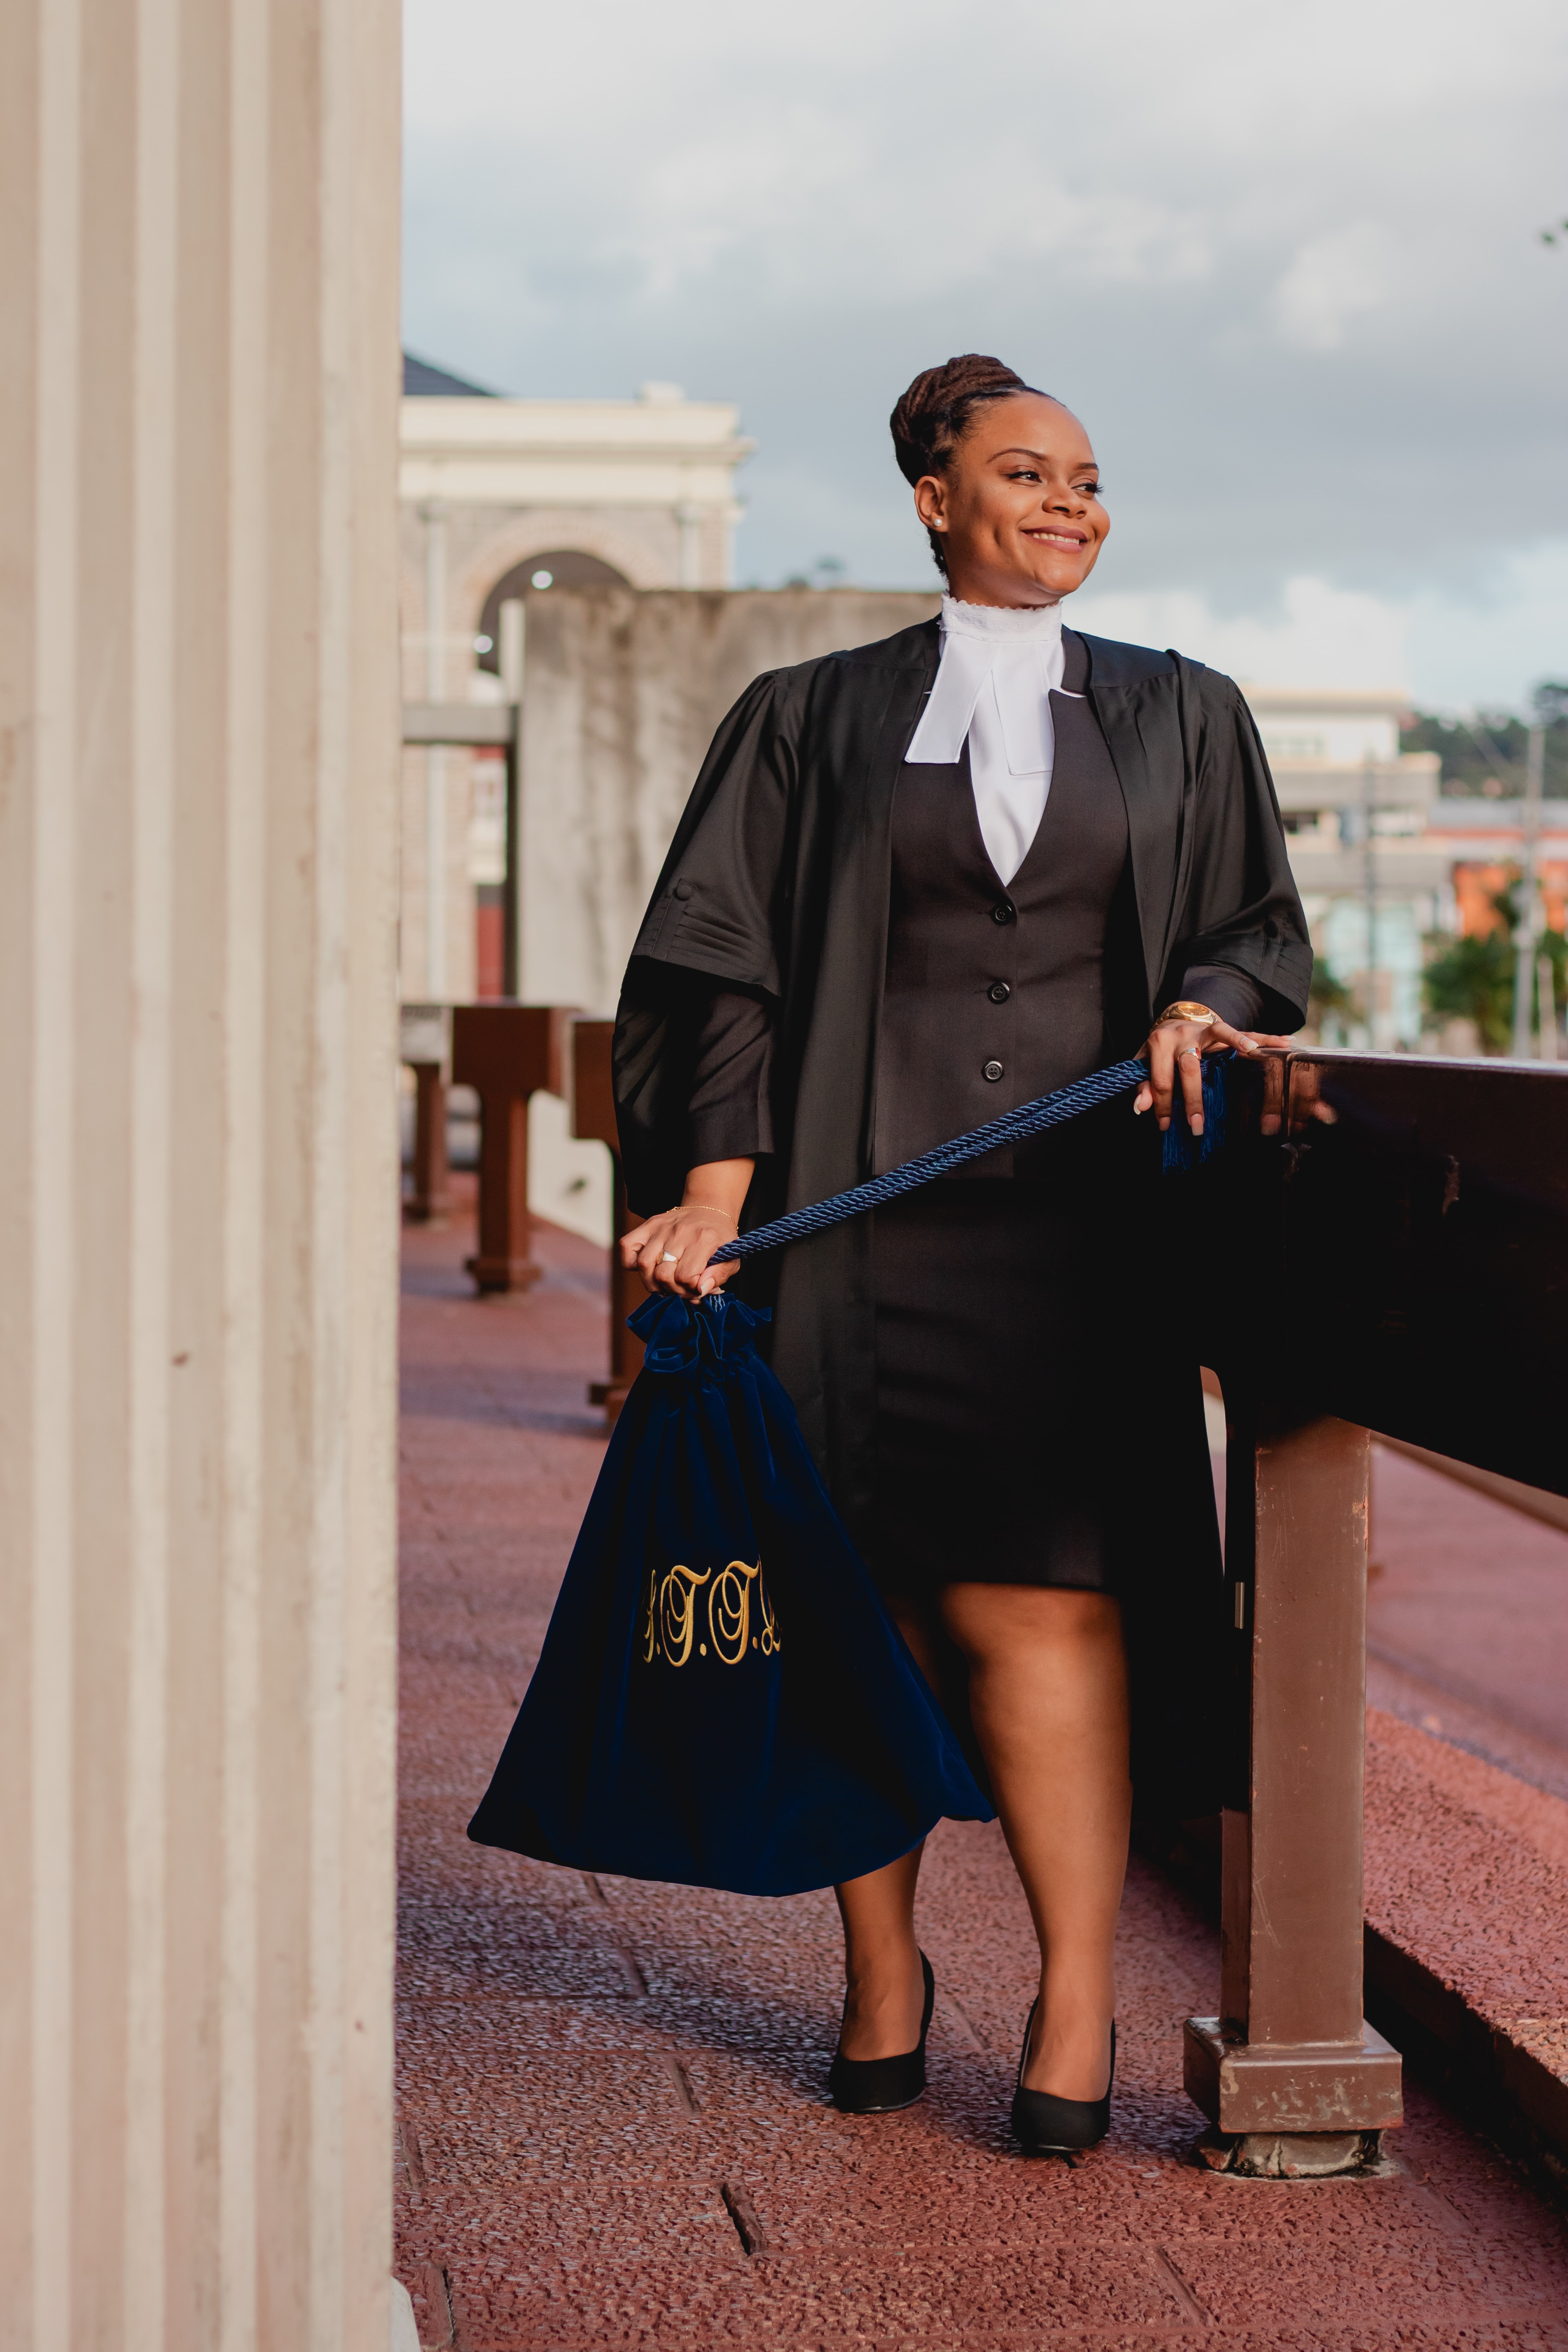 recent-femail-law-school-graduate-looking-over-river